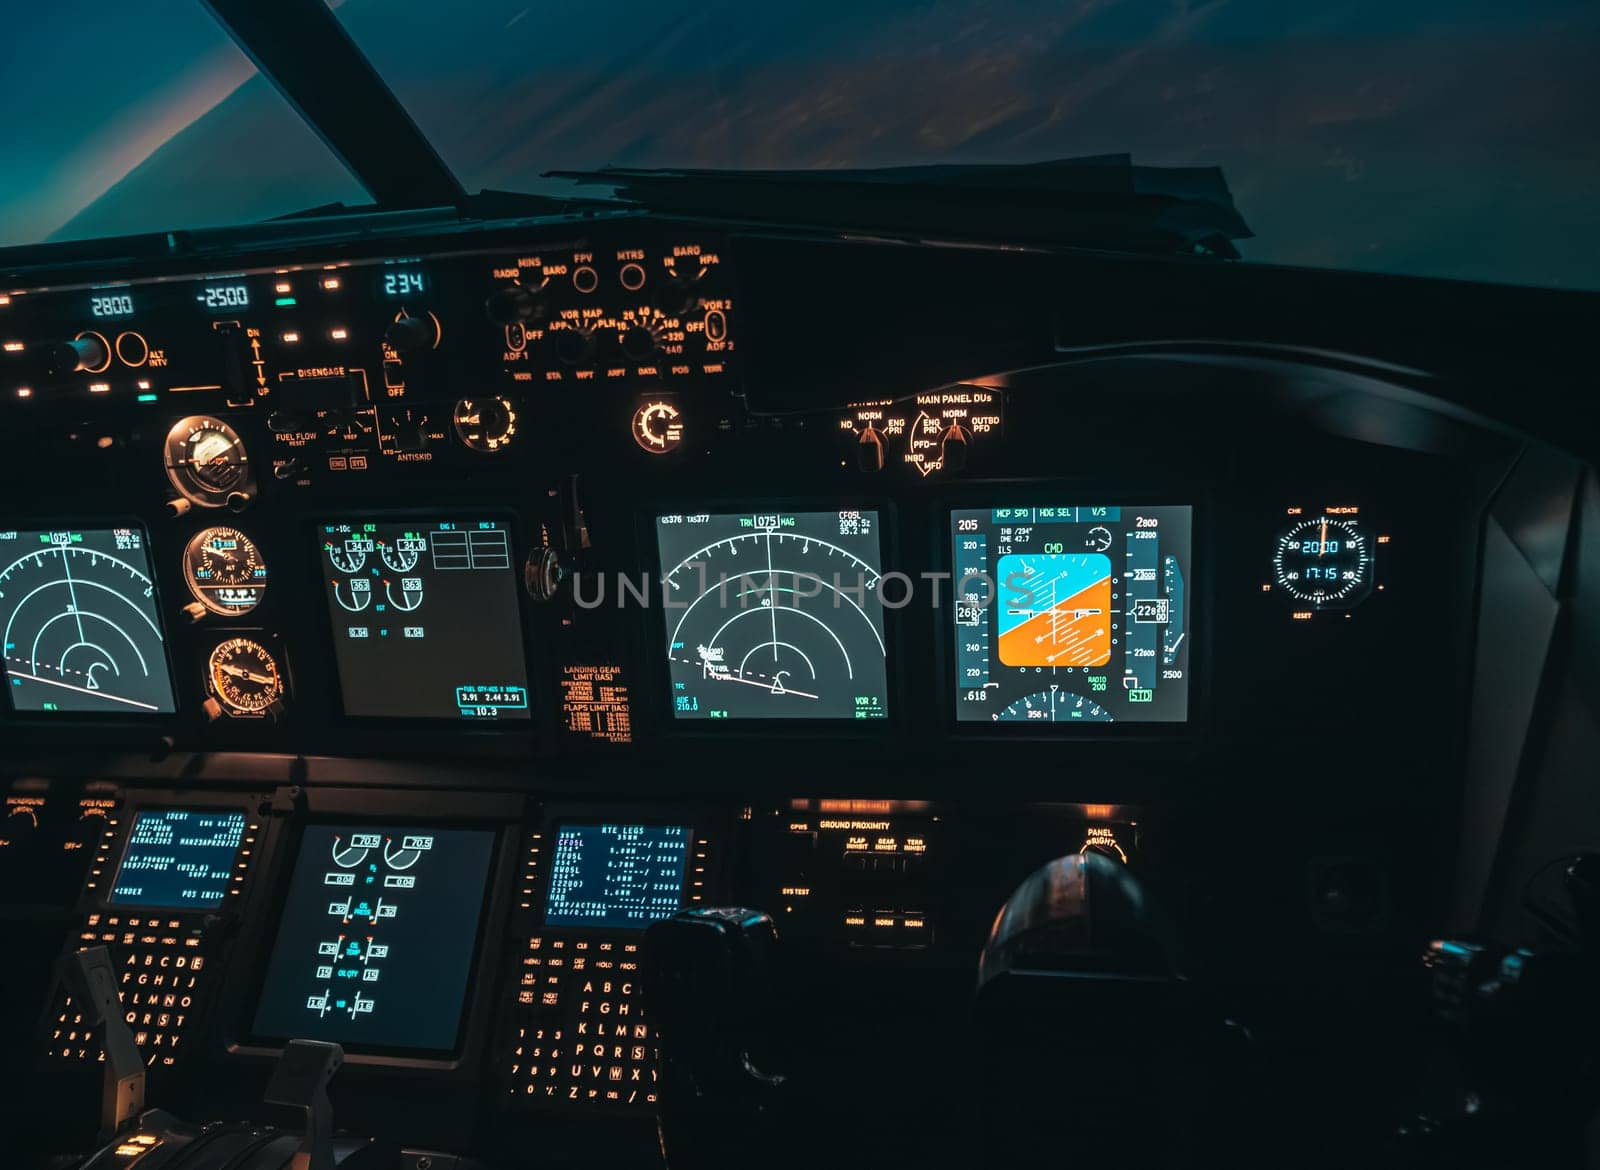 Cockpit view of an airplane during a night-time flight with illuminated instrument panels by Busker